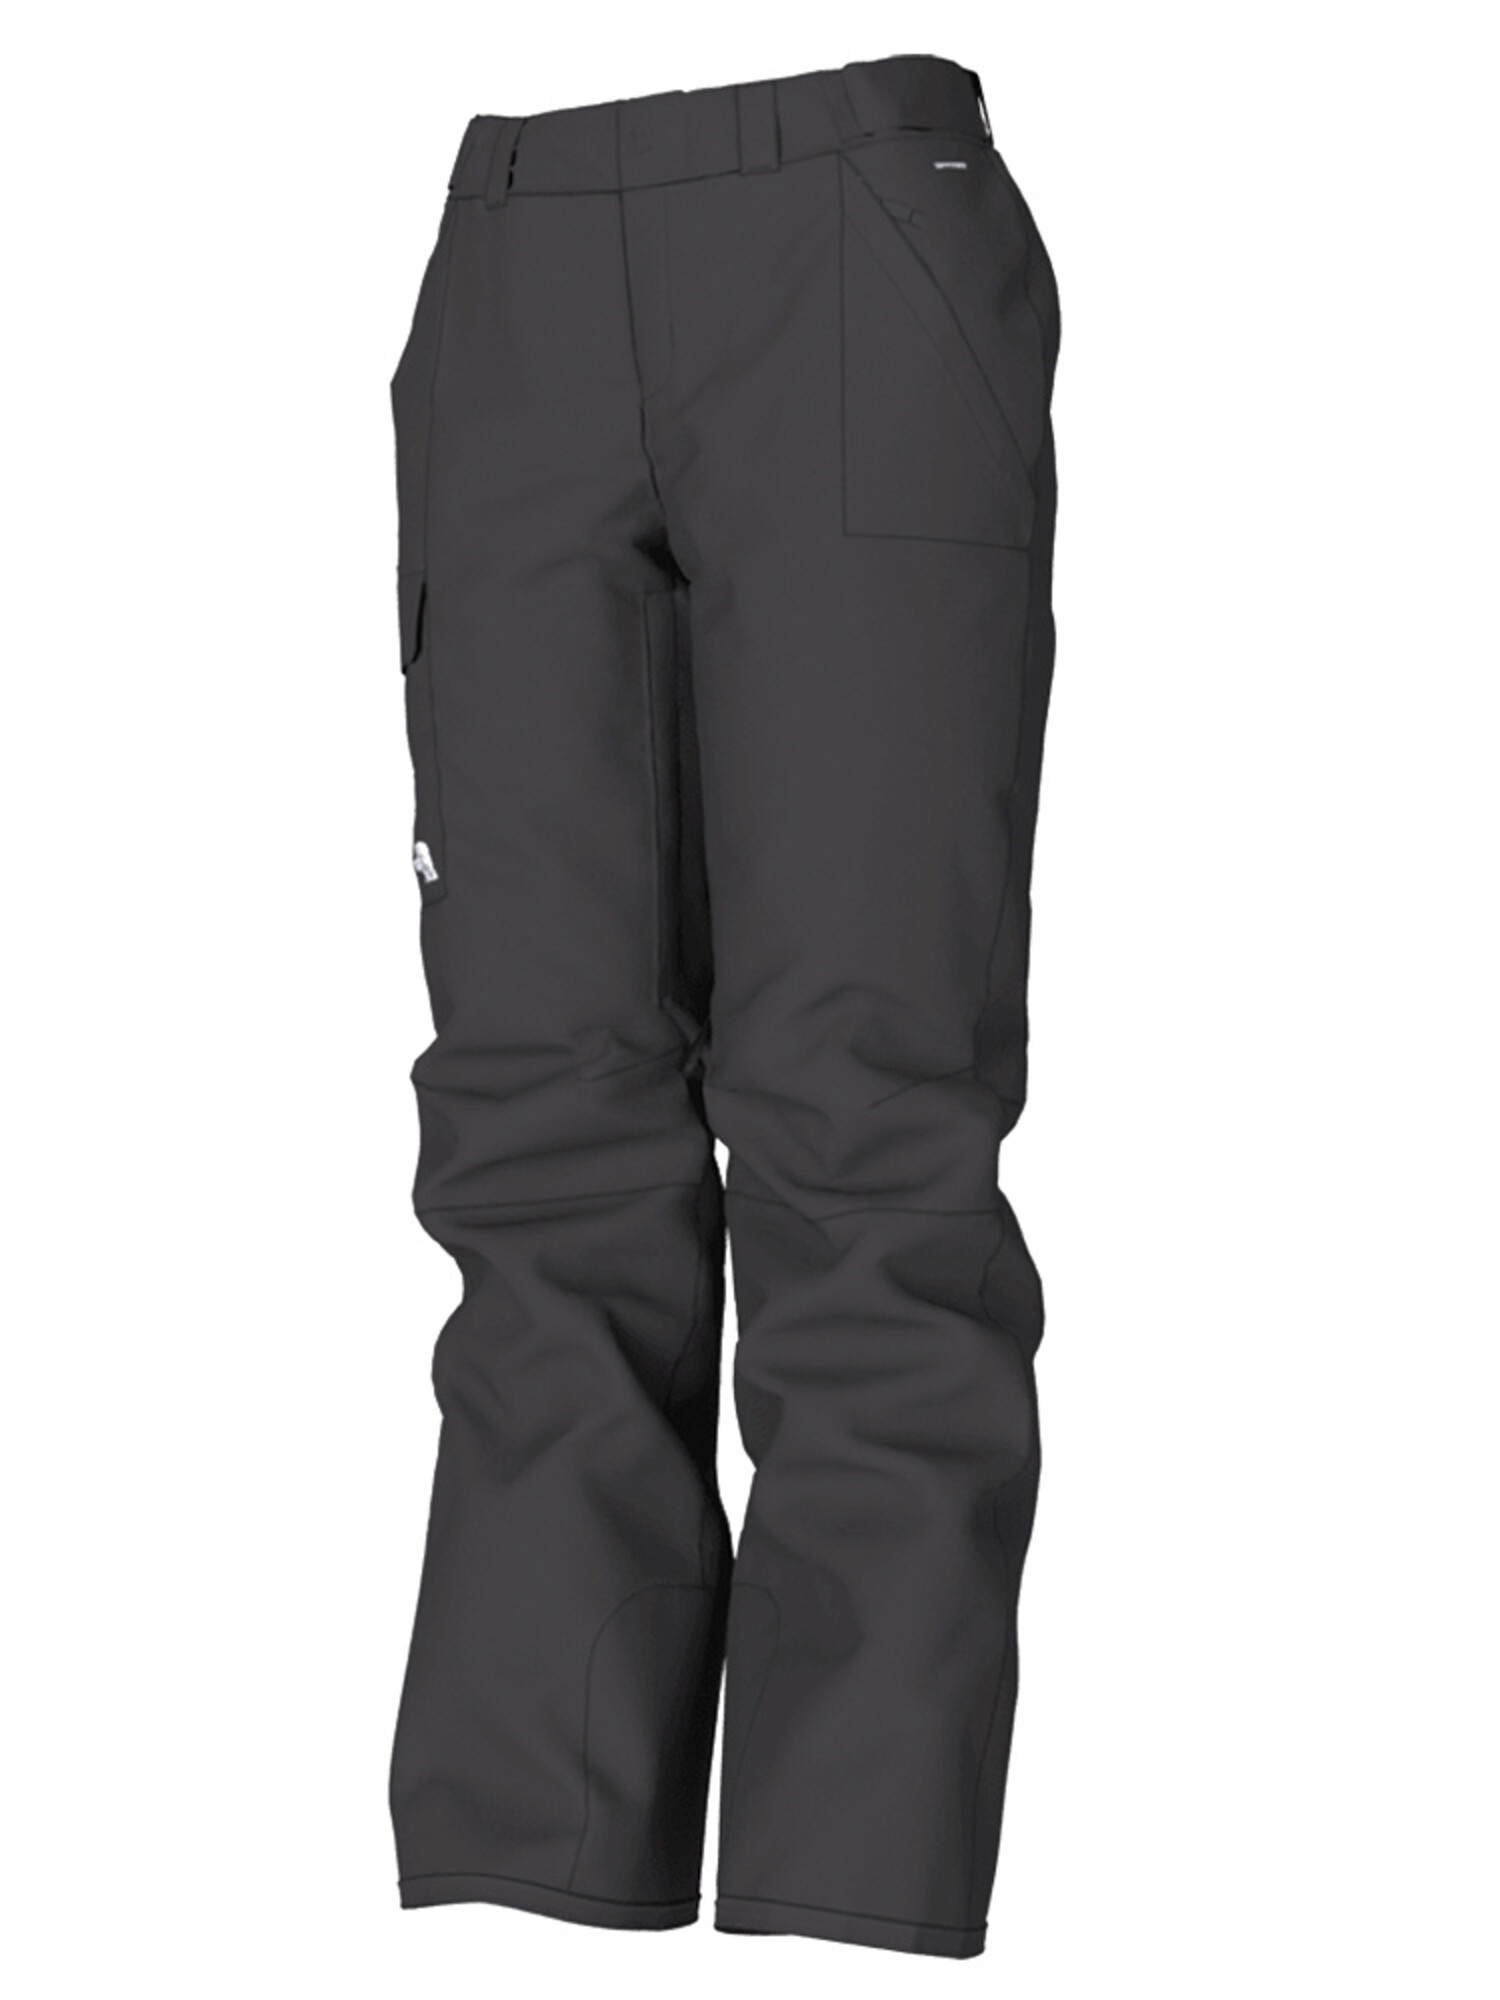 The North Face Hyvent Women's Ski Pants Black Size Small Snowboard Snow  Pants